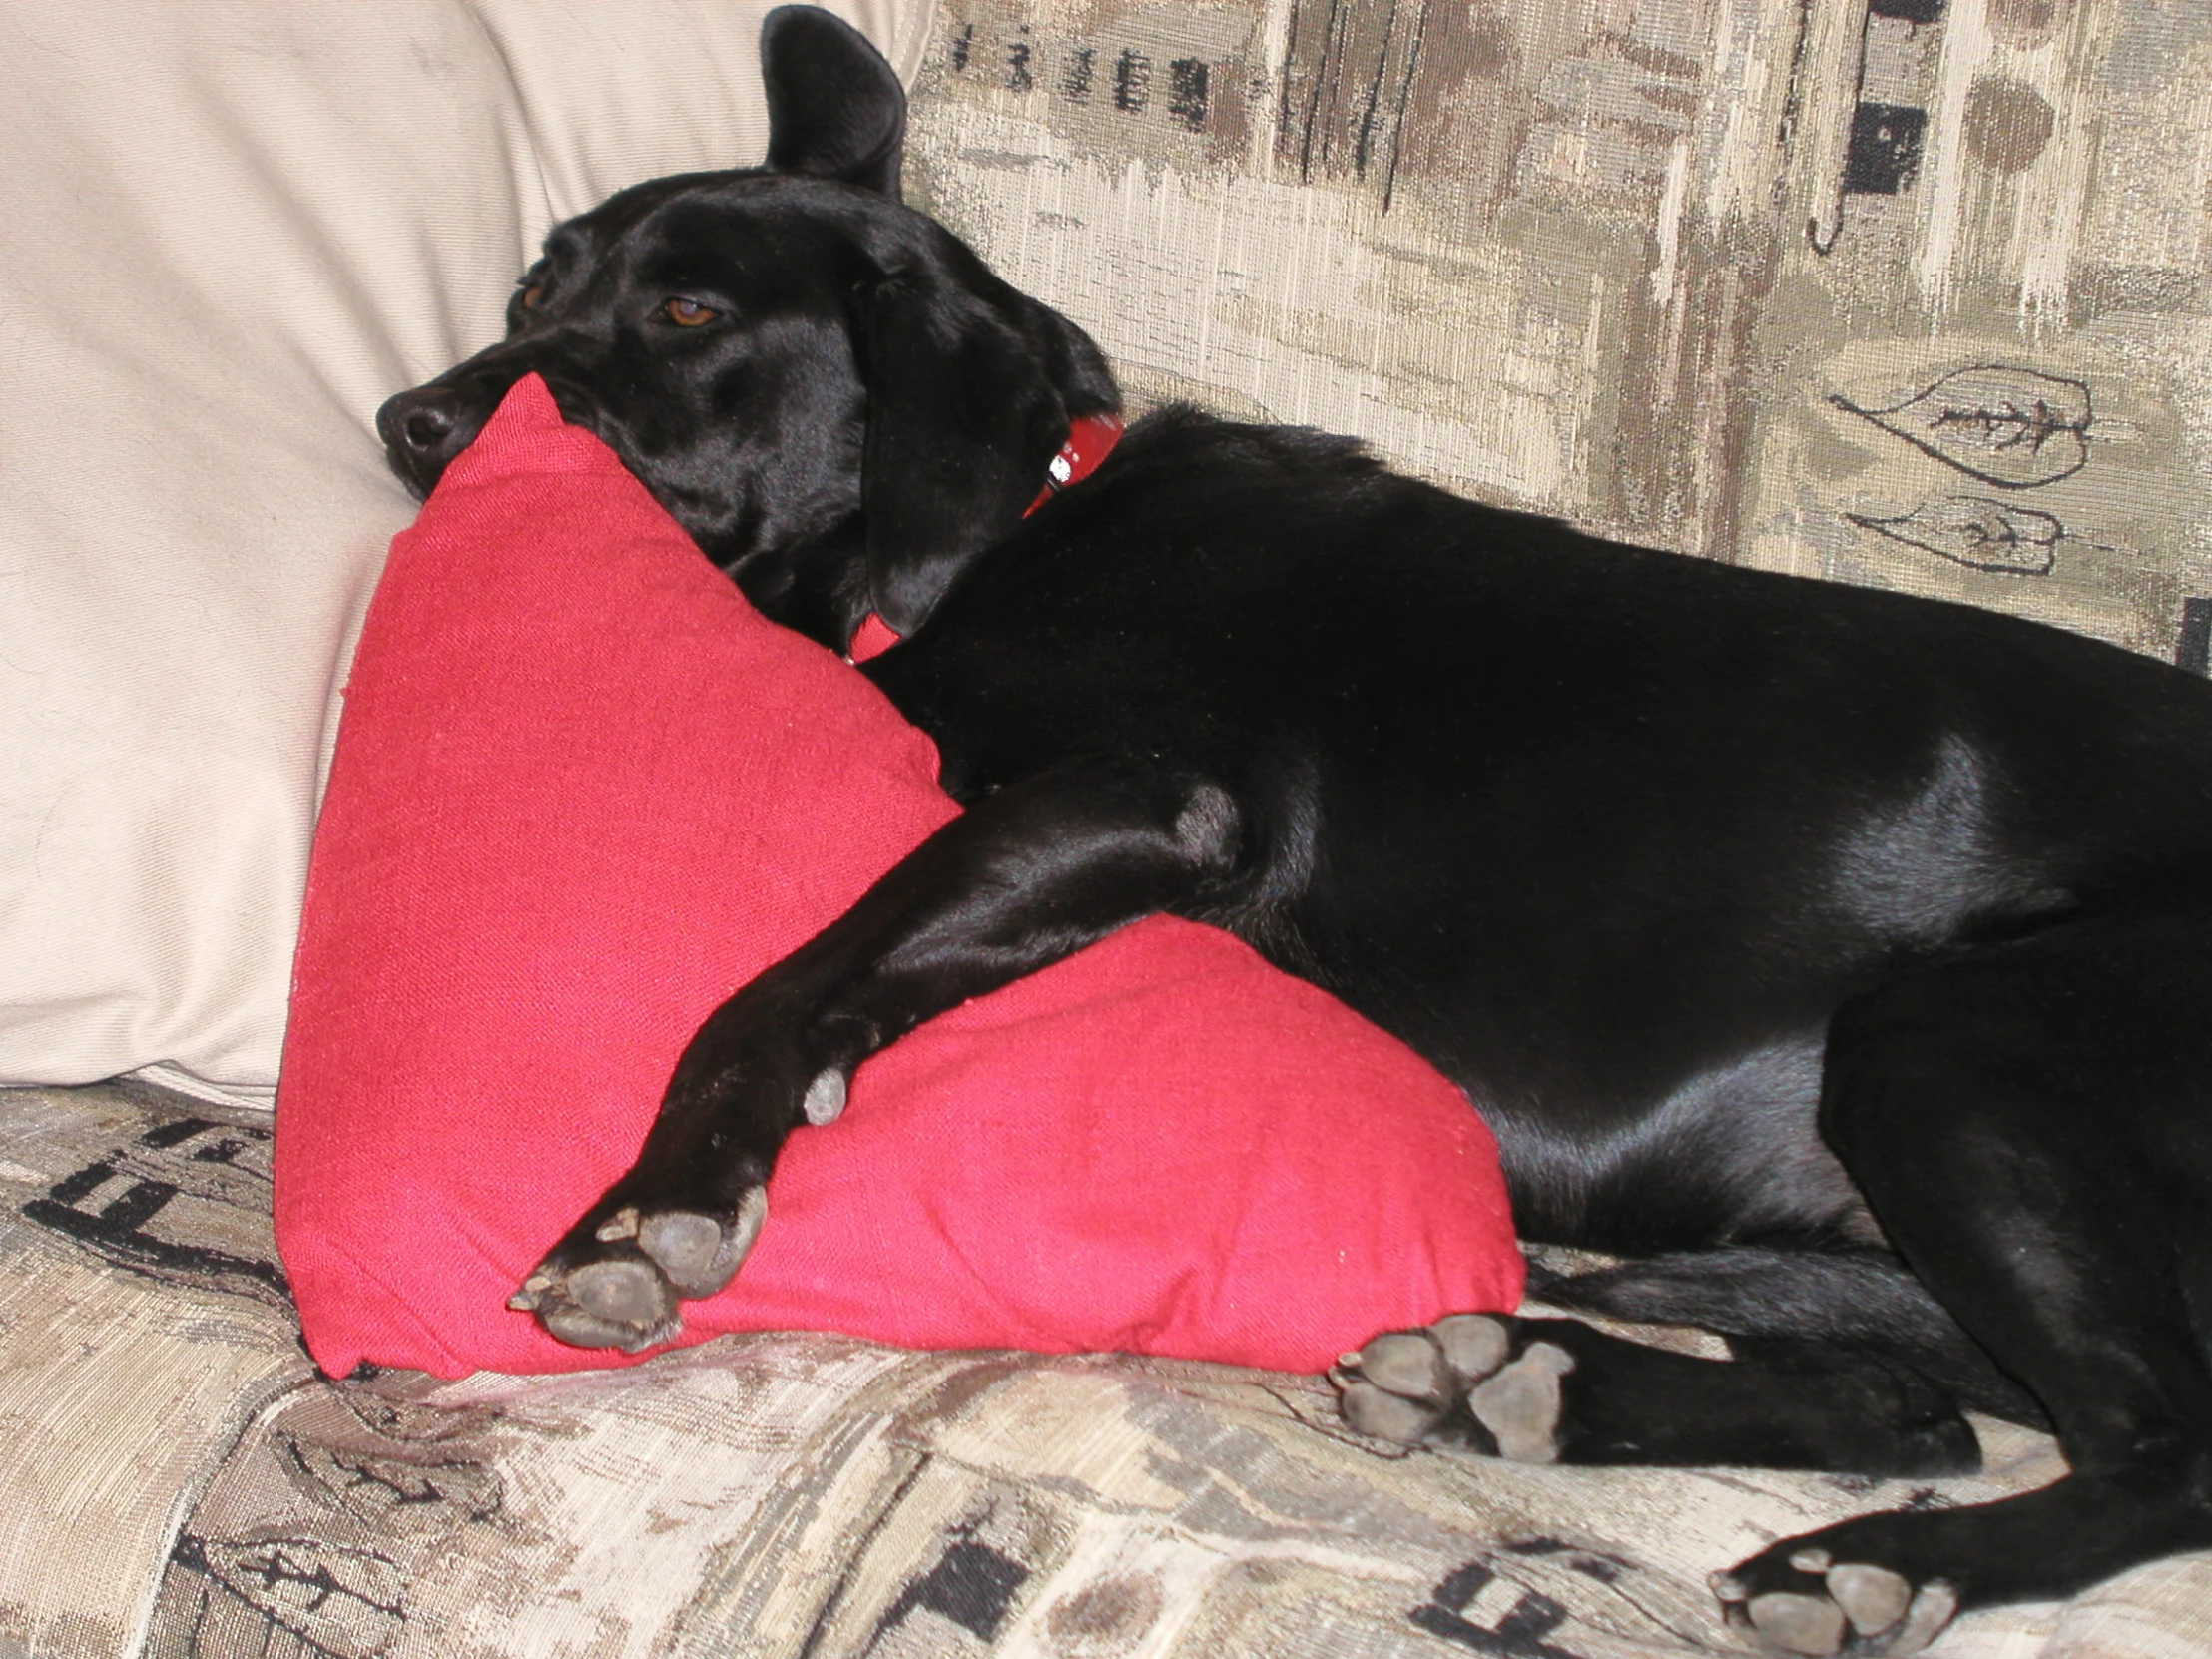 the black dog is laying on top of a red pillow